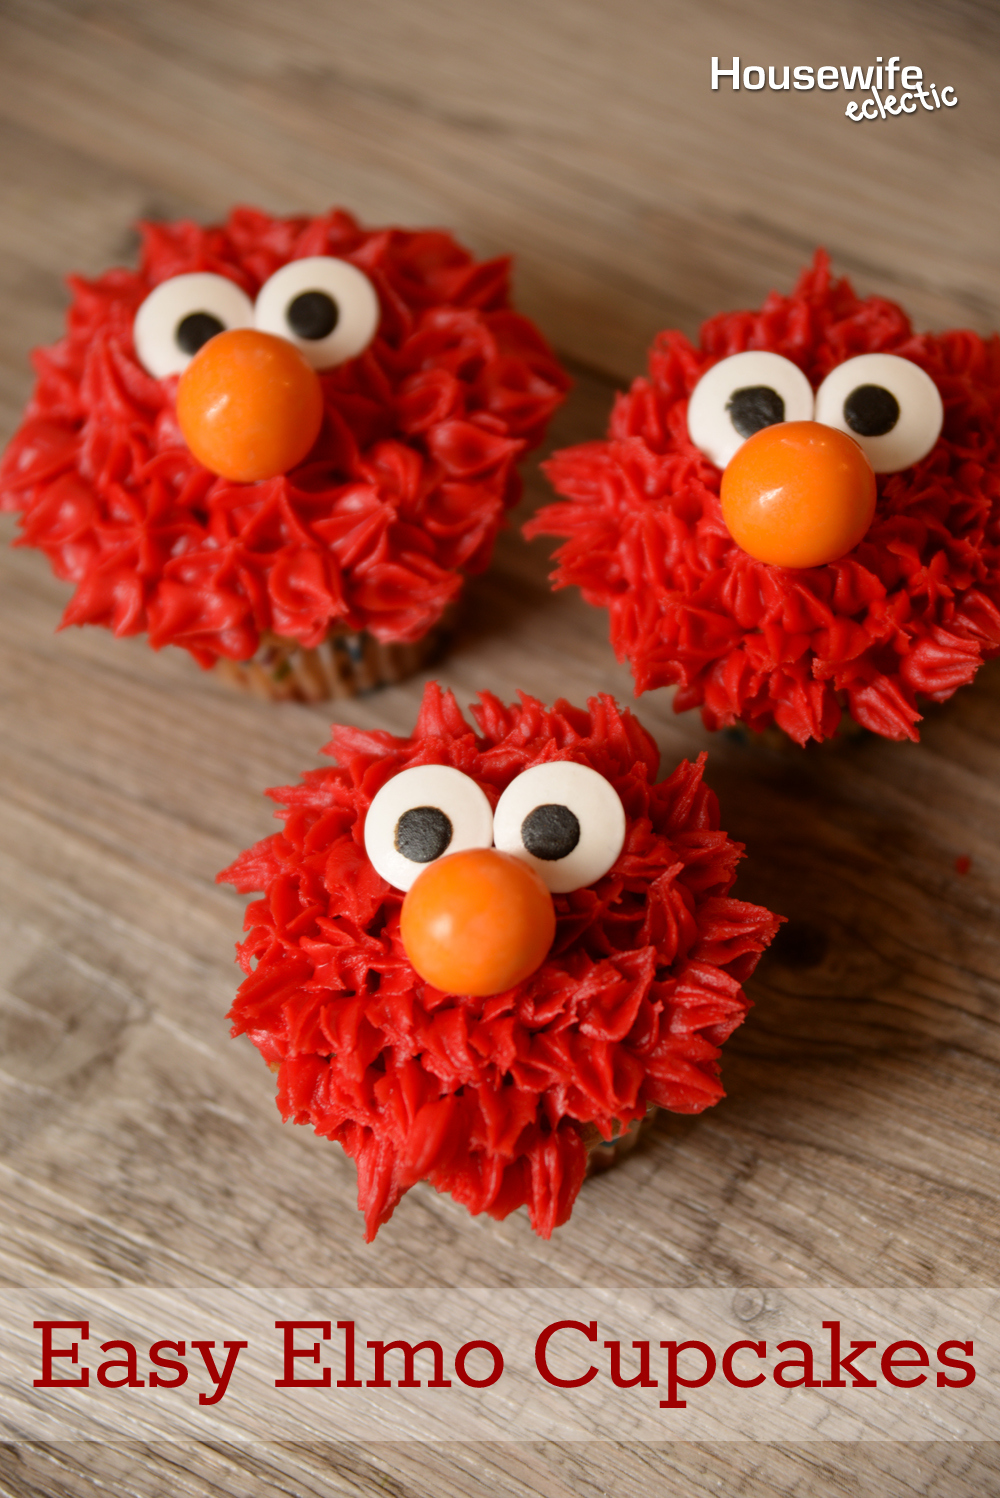 Easy Elmo Cupcakes - Housewife Eclectic